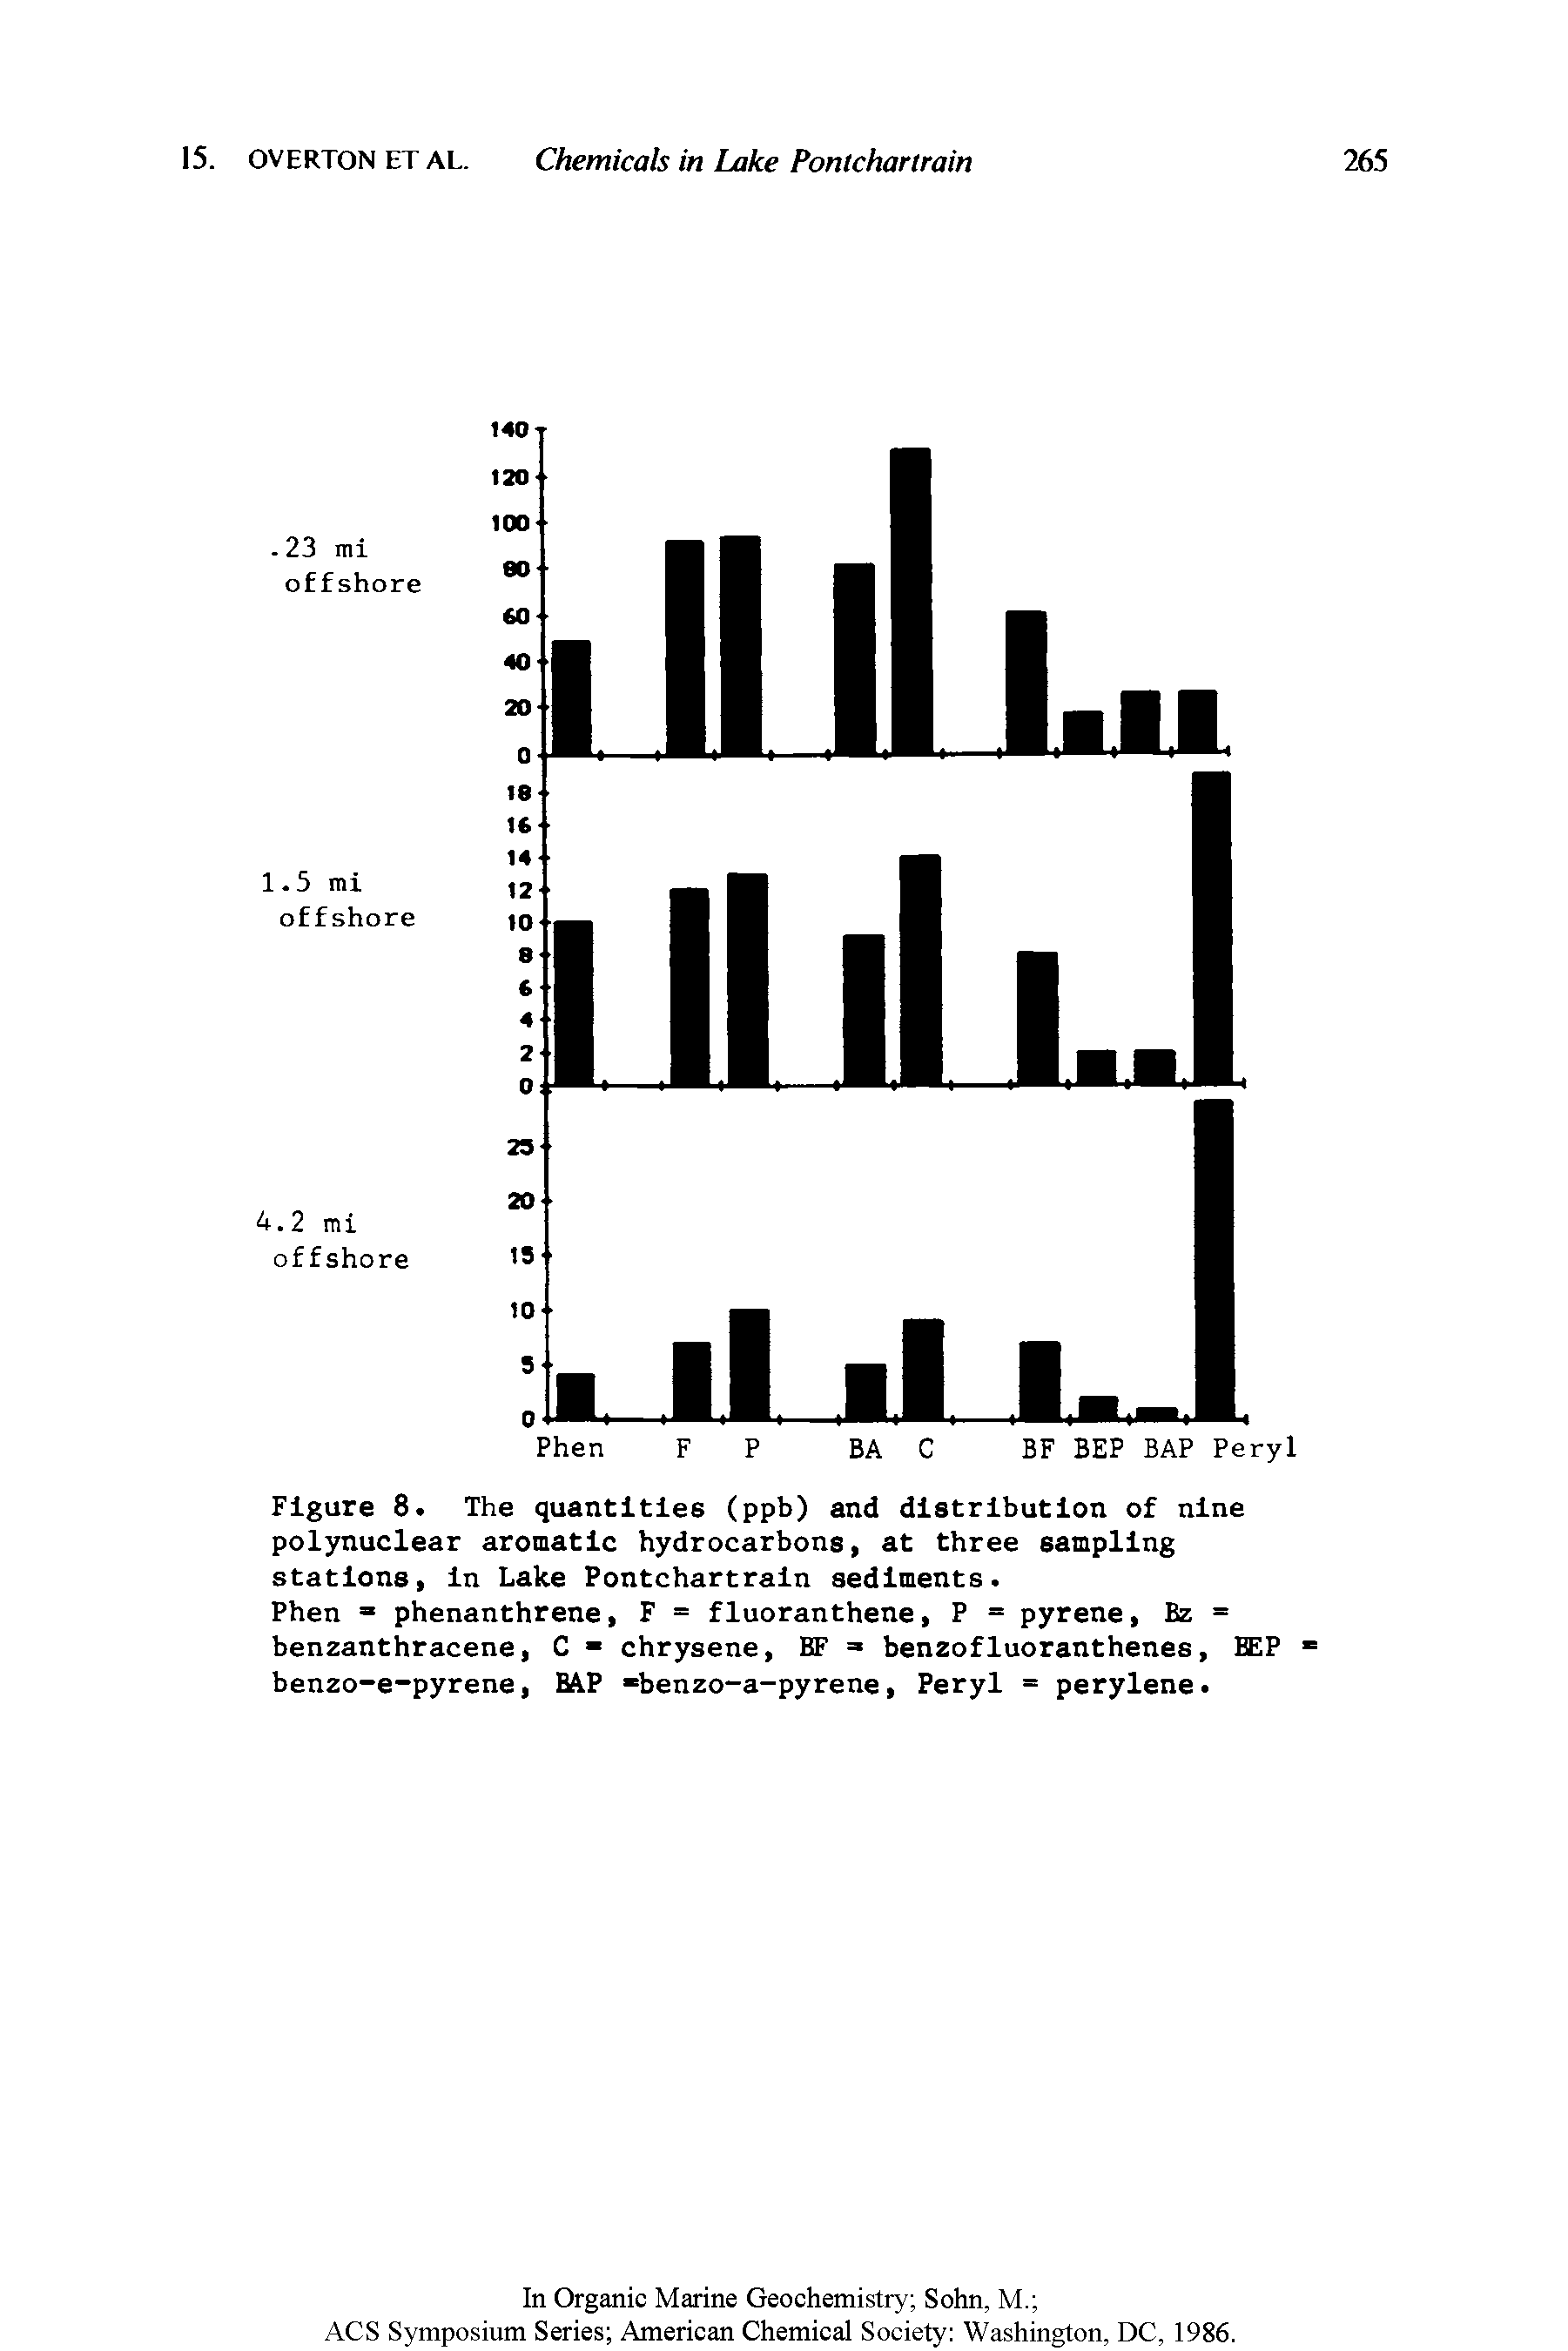 Figure 8. The quantities (ppb) and distribution of nine polynuclear aromatic hydrocarbons, at three sampling stations, In Lake Pontchartrain sediments.